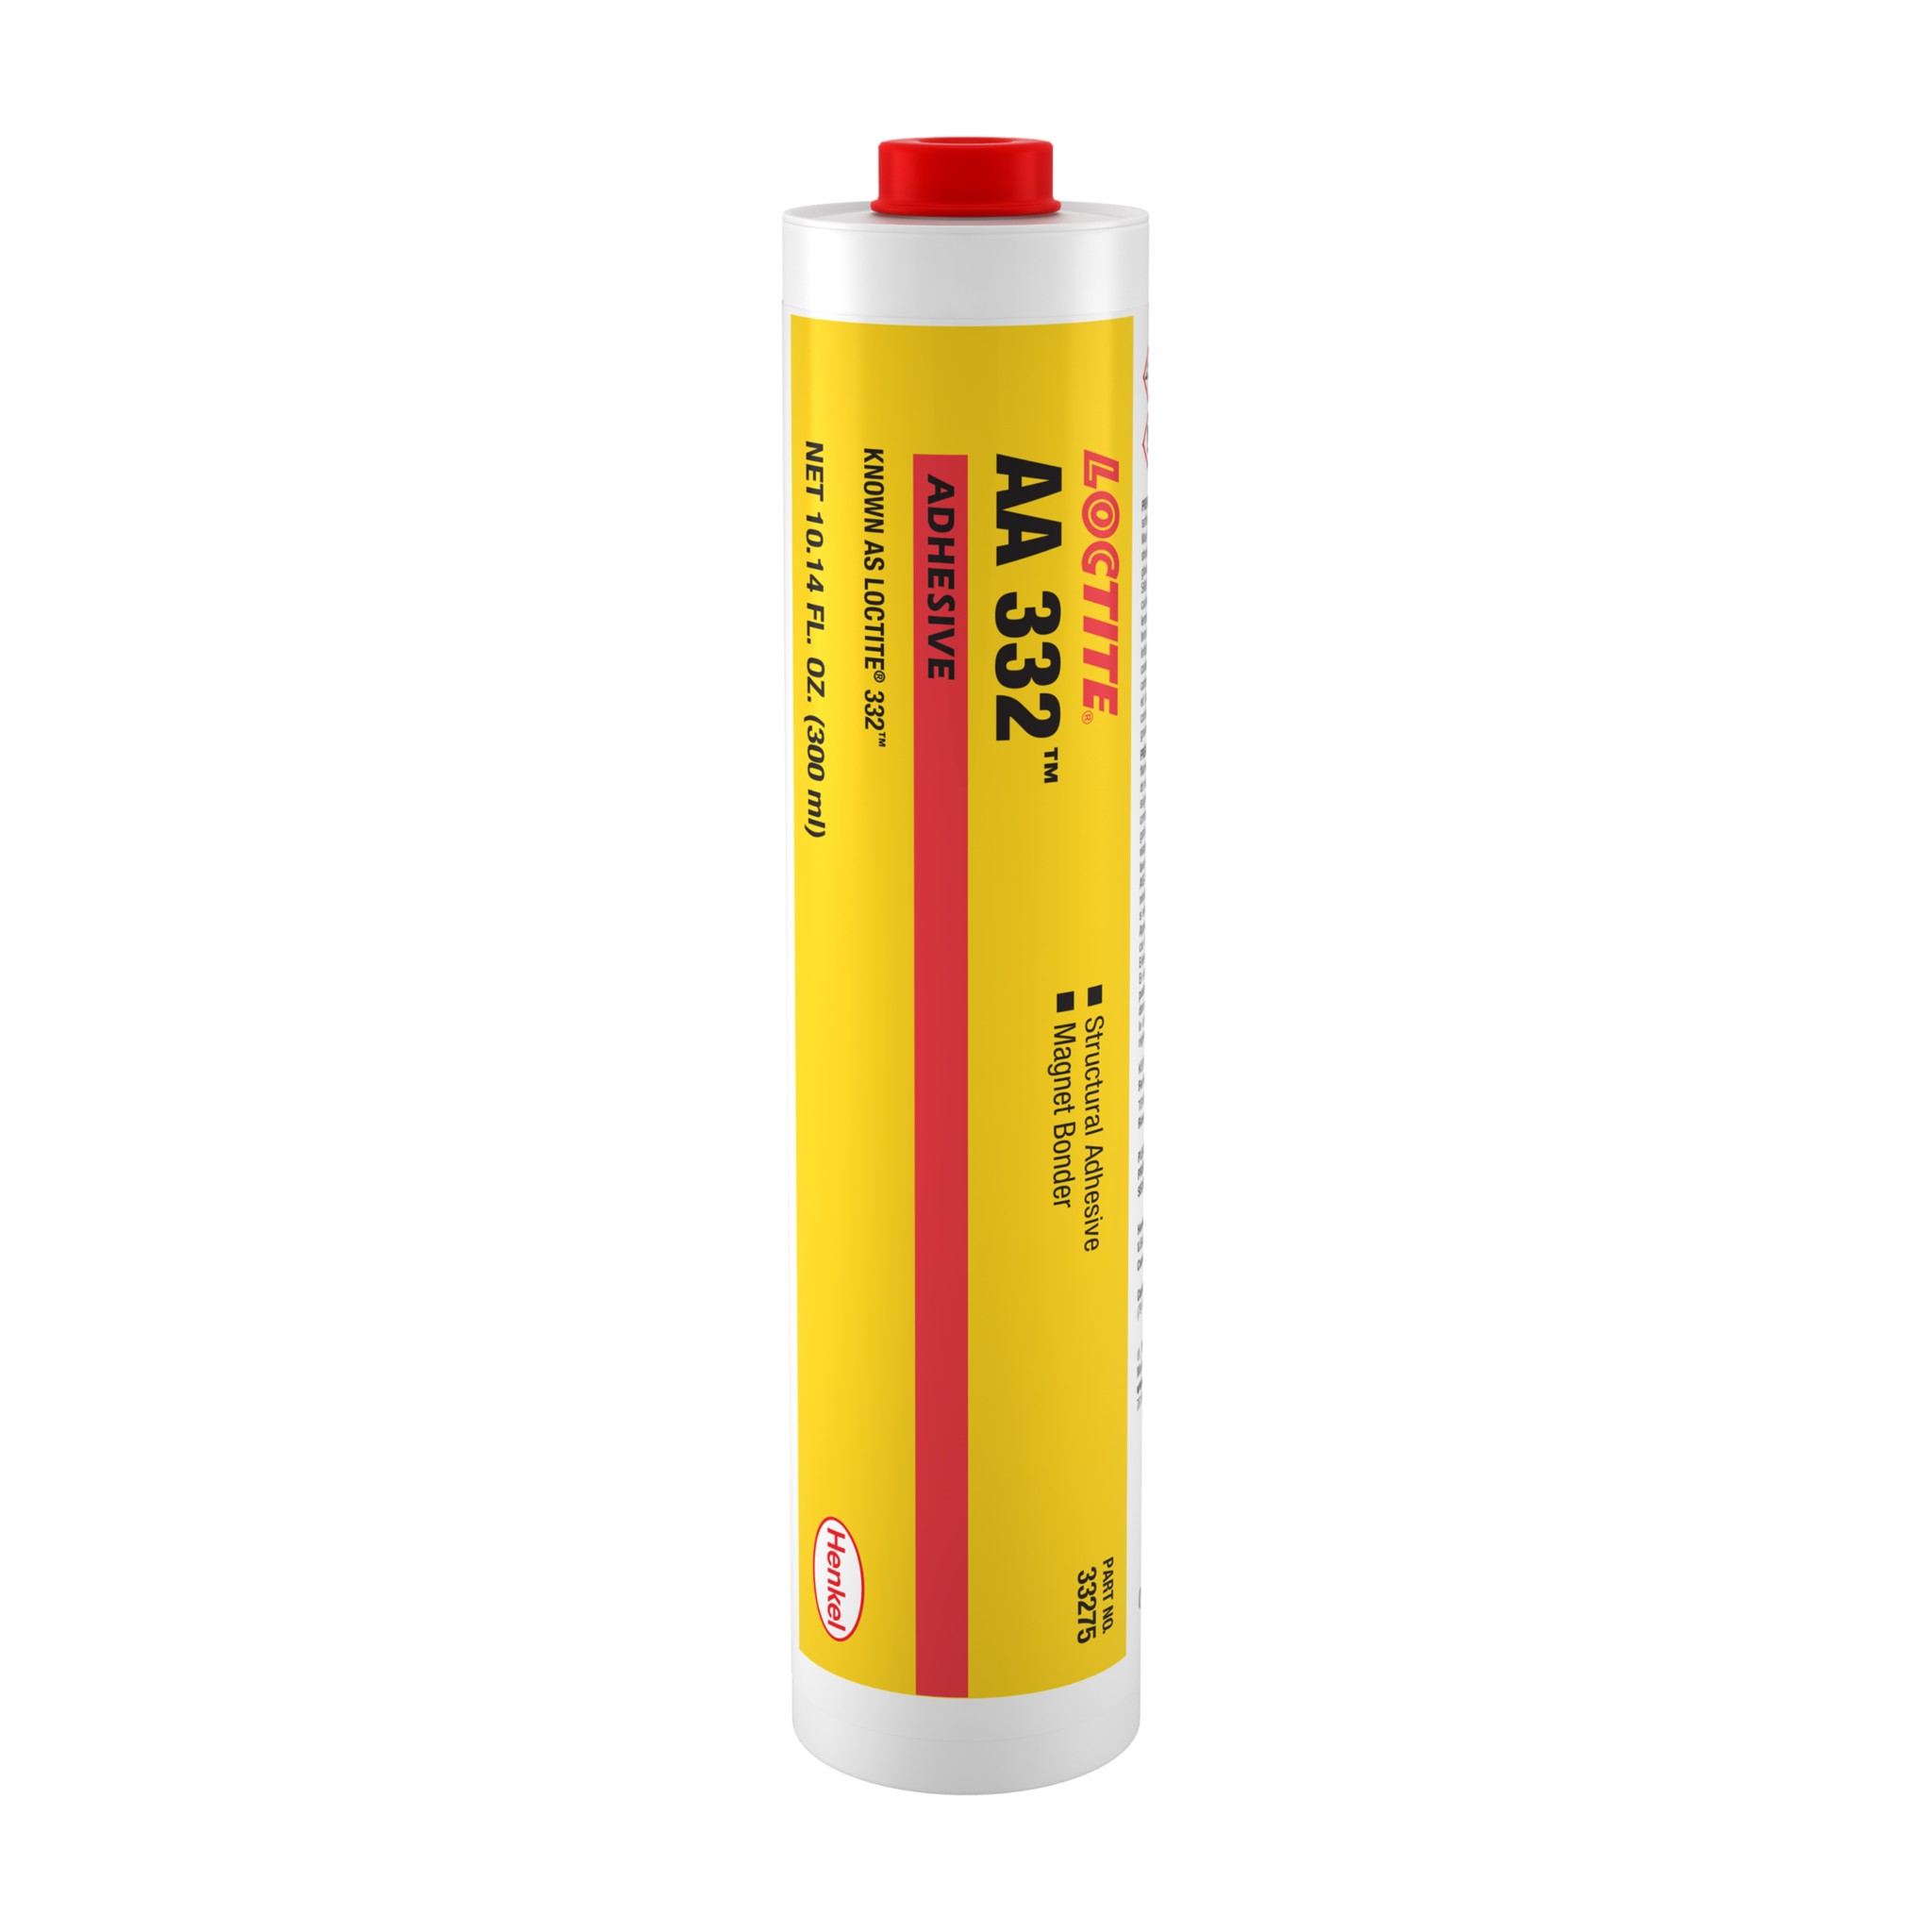 LOCTITE® AA 332 - Fast-curing adhesive for high-temperature